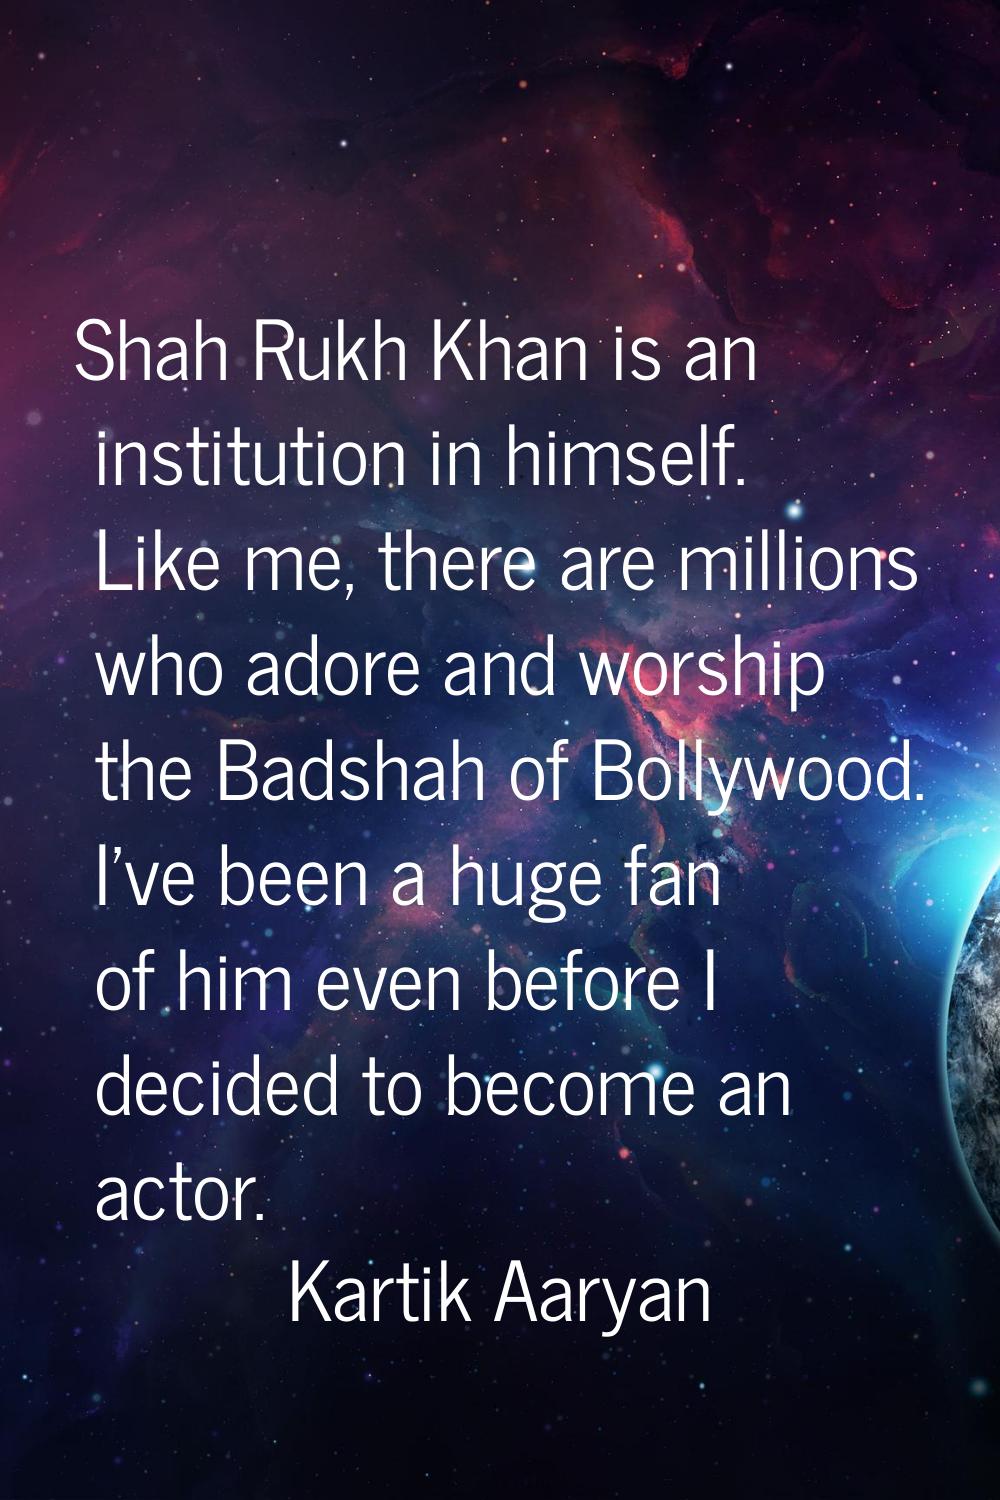 Shah Rukh Khan is an institution in himself. Like me, there are millions who adore and worship the 